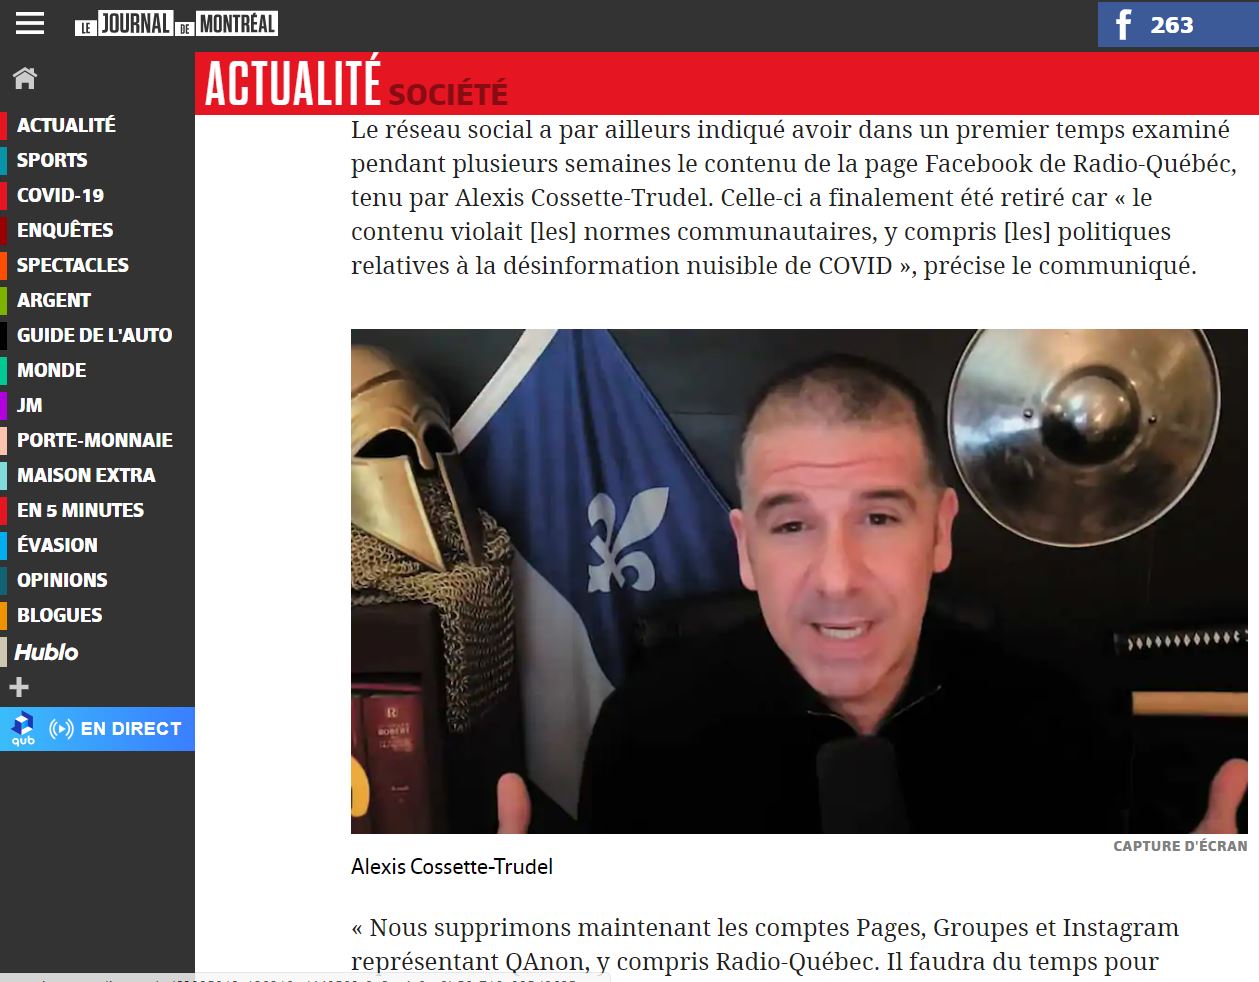 alexis-cossette-trudeal-voit-sa-page-fb-supprimee.JPG